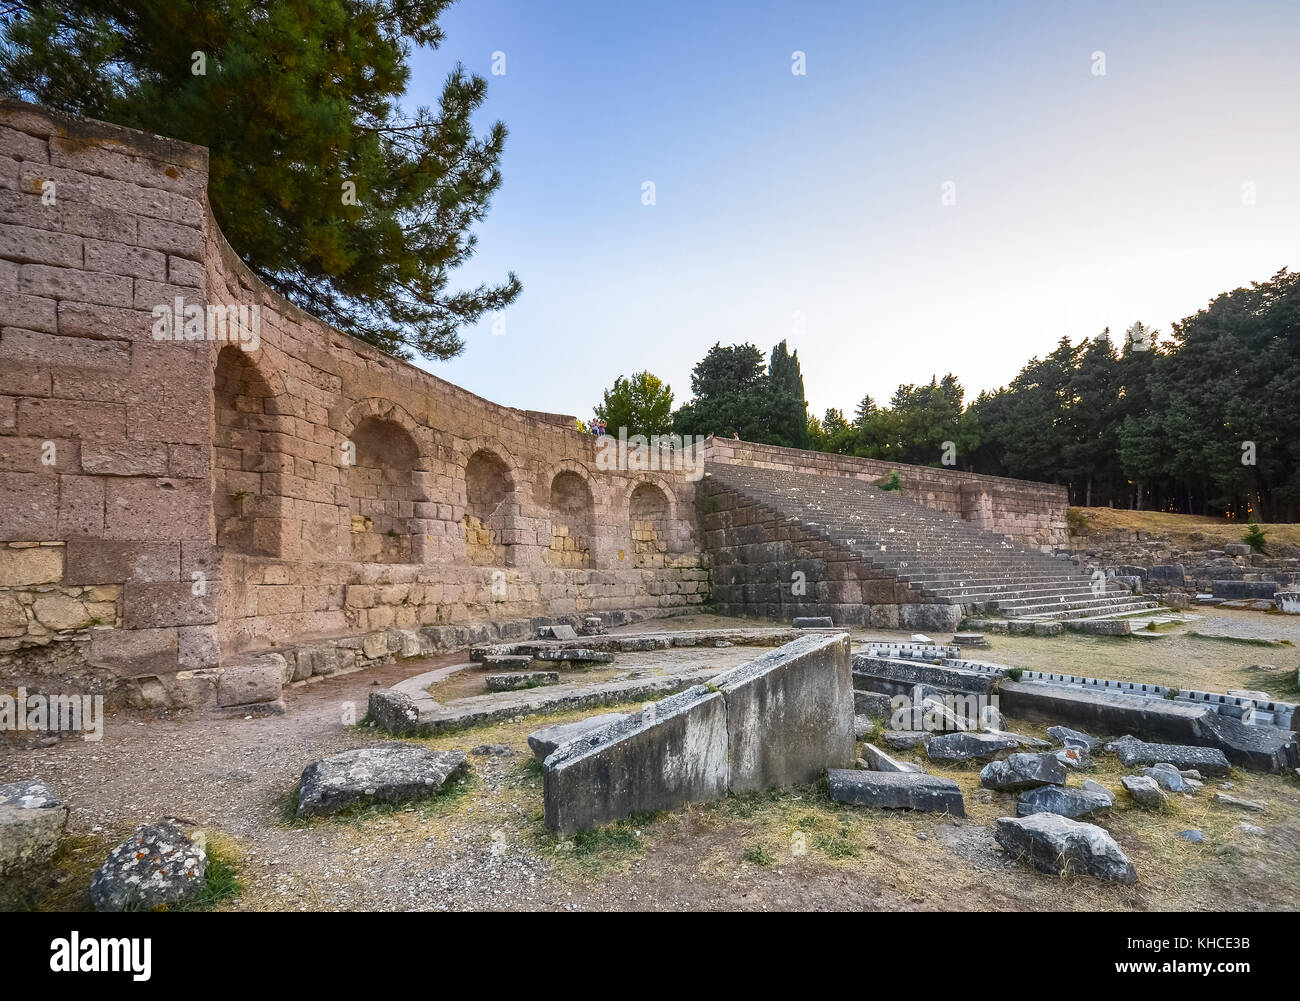 Ruins of asclepeion in Kos Greece, ancient greek temple dedicated to Asclepius, the god of medicine. Stock Photo